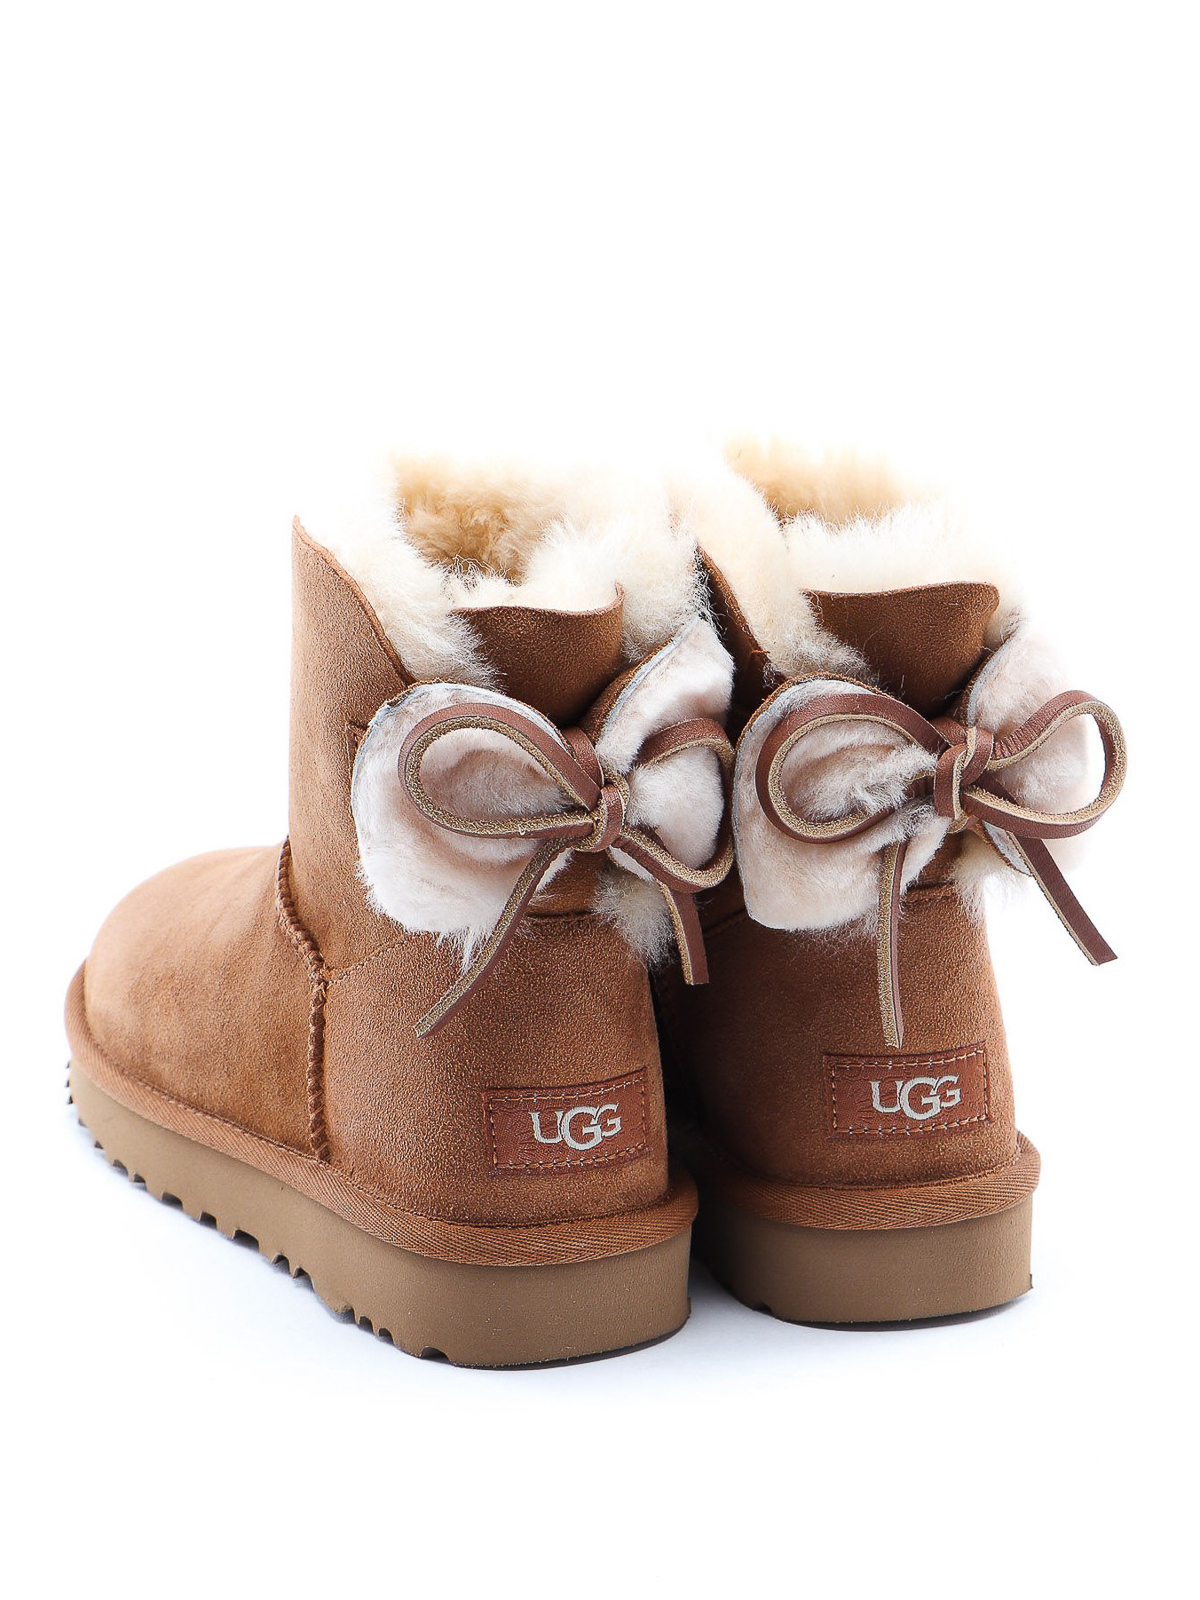 ugg boots double bow